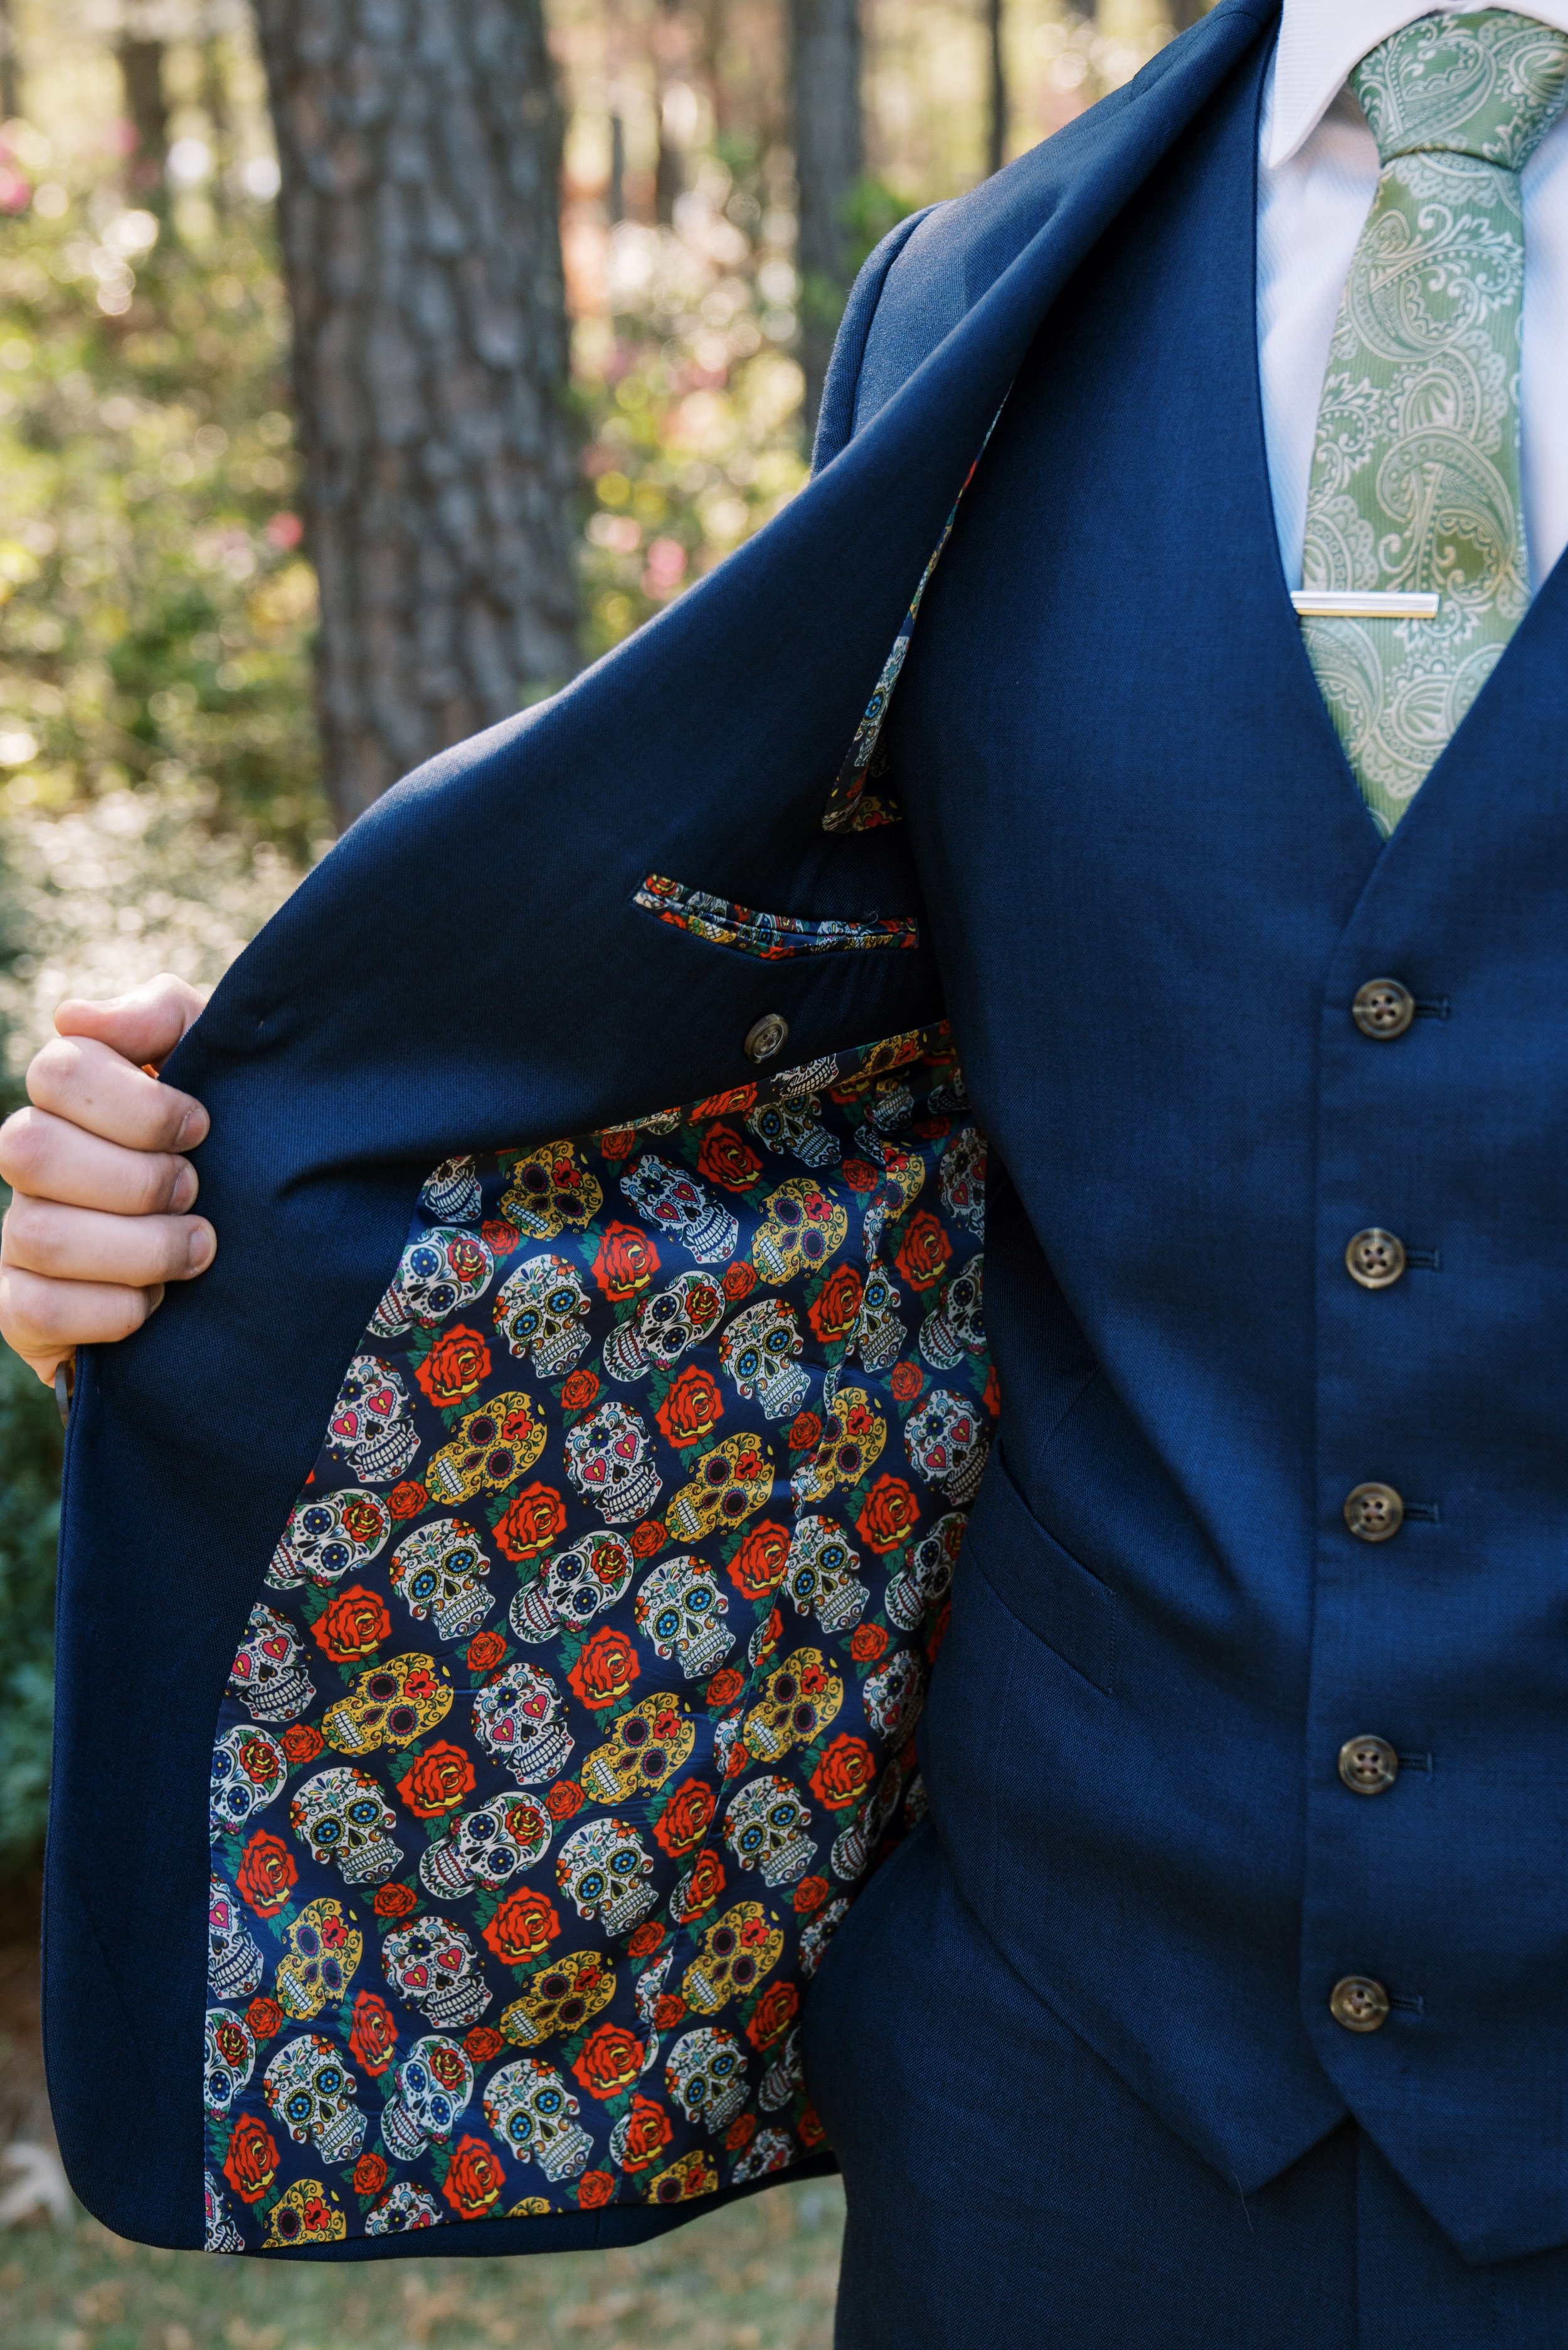 Skull Candy Suit Jacket Detail Groom Cape Fear Botanical Garden Wedding Fancy This Photography